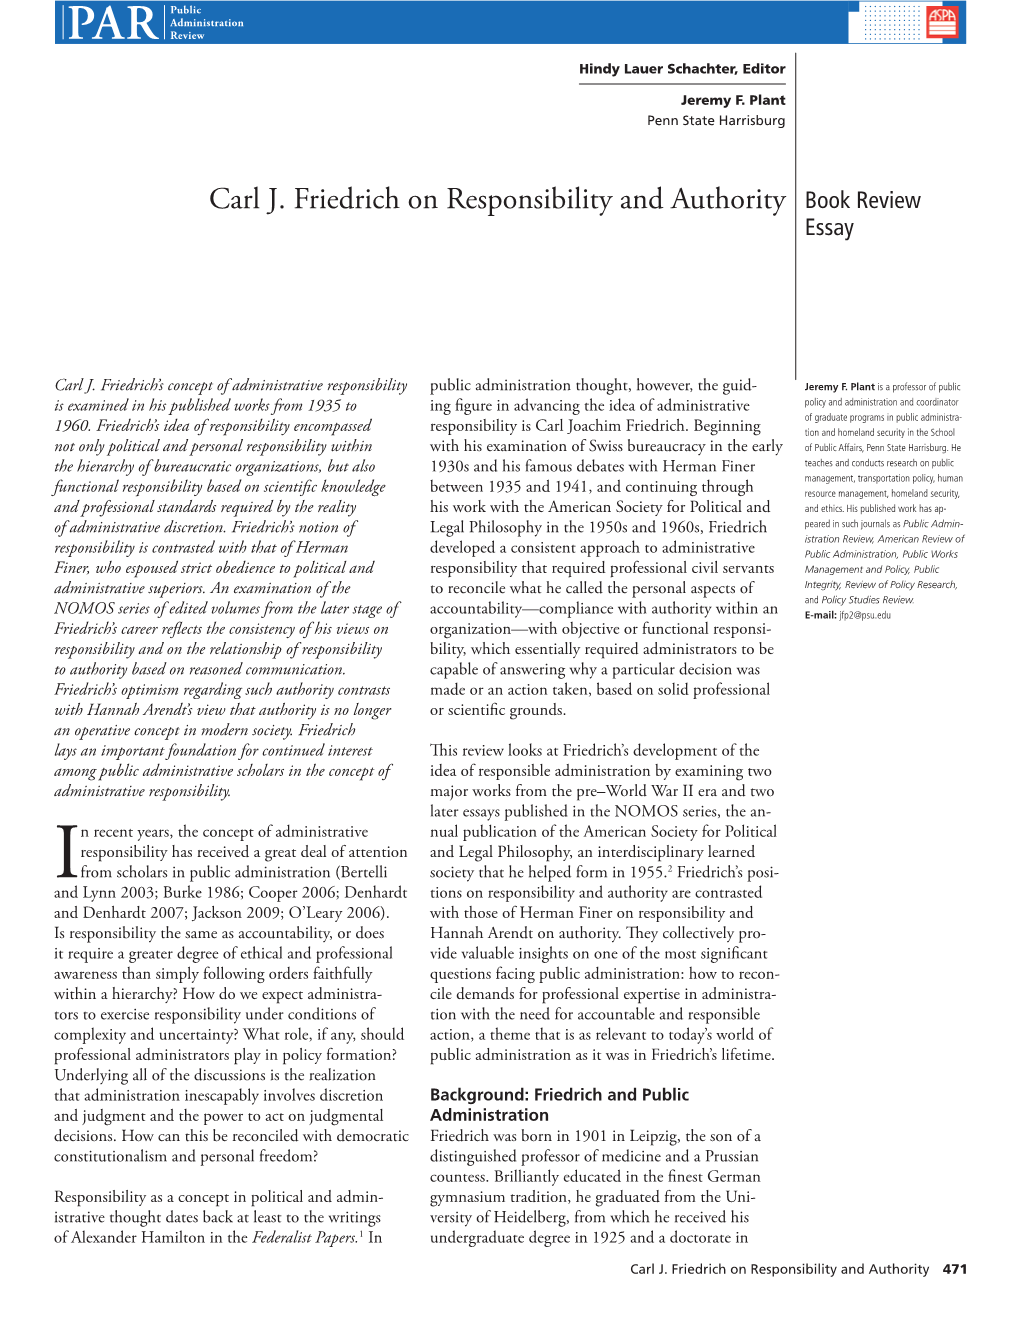 Carl J. Friedrich on Responsibility and Authority Book Review Essay